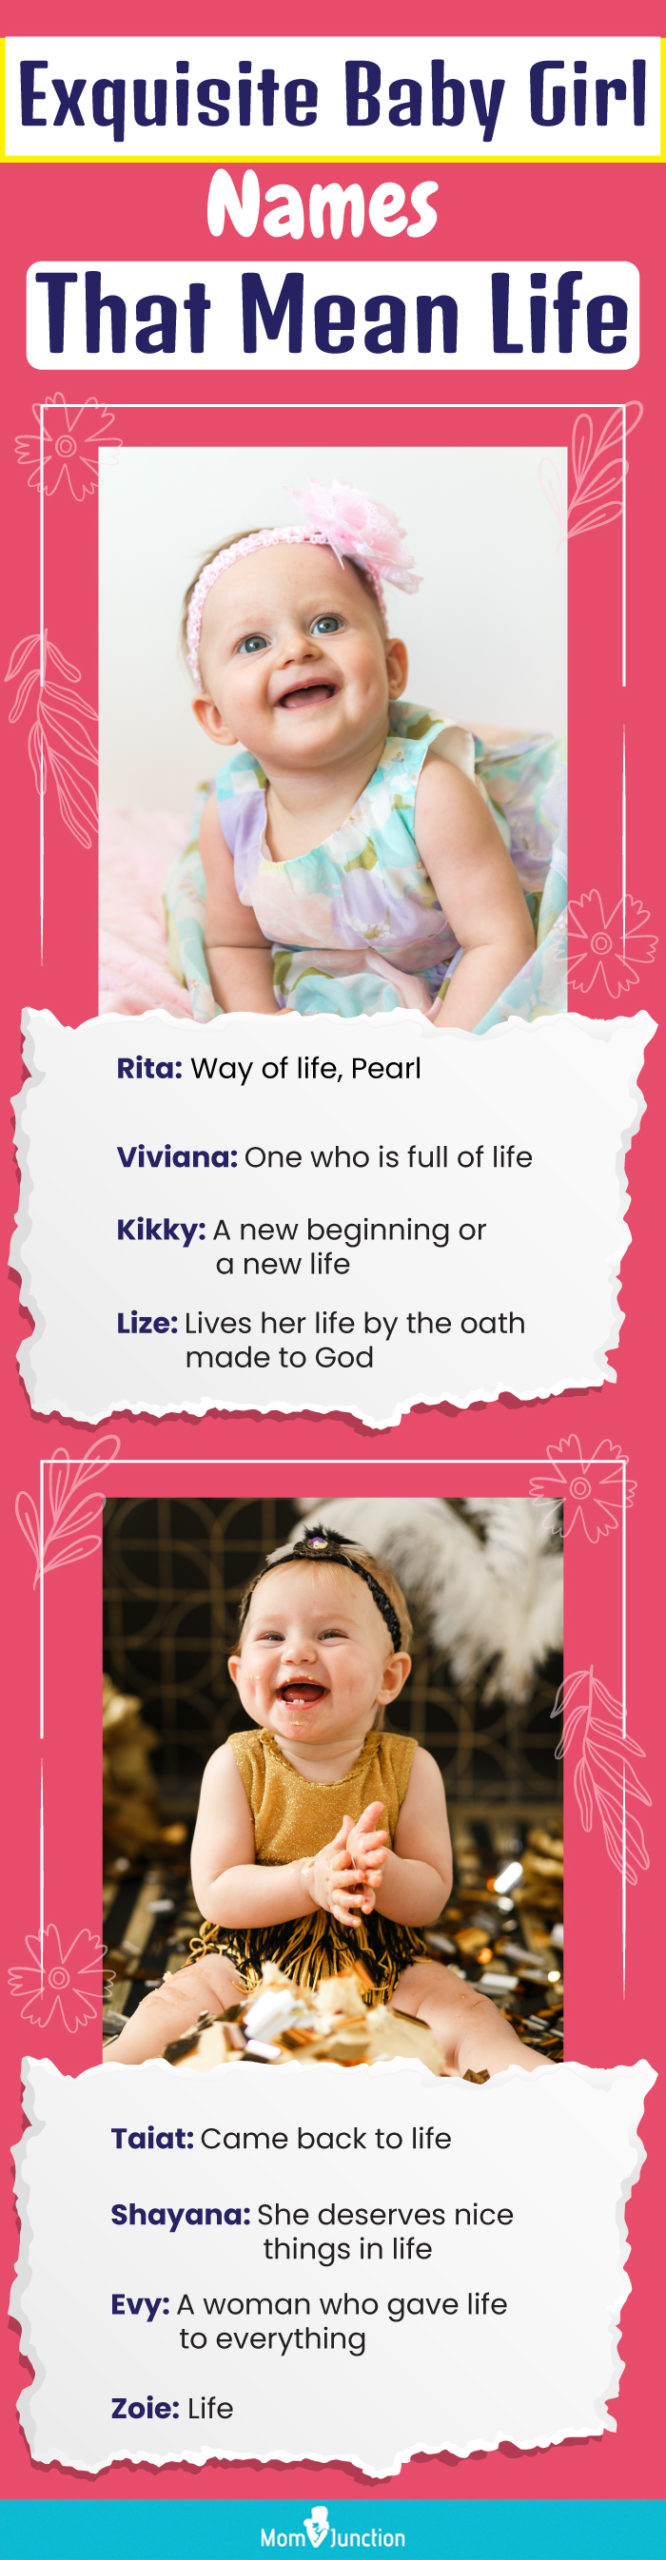 exquisite baby girl names that mean life (infographic)